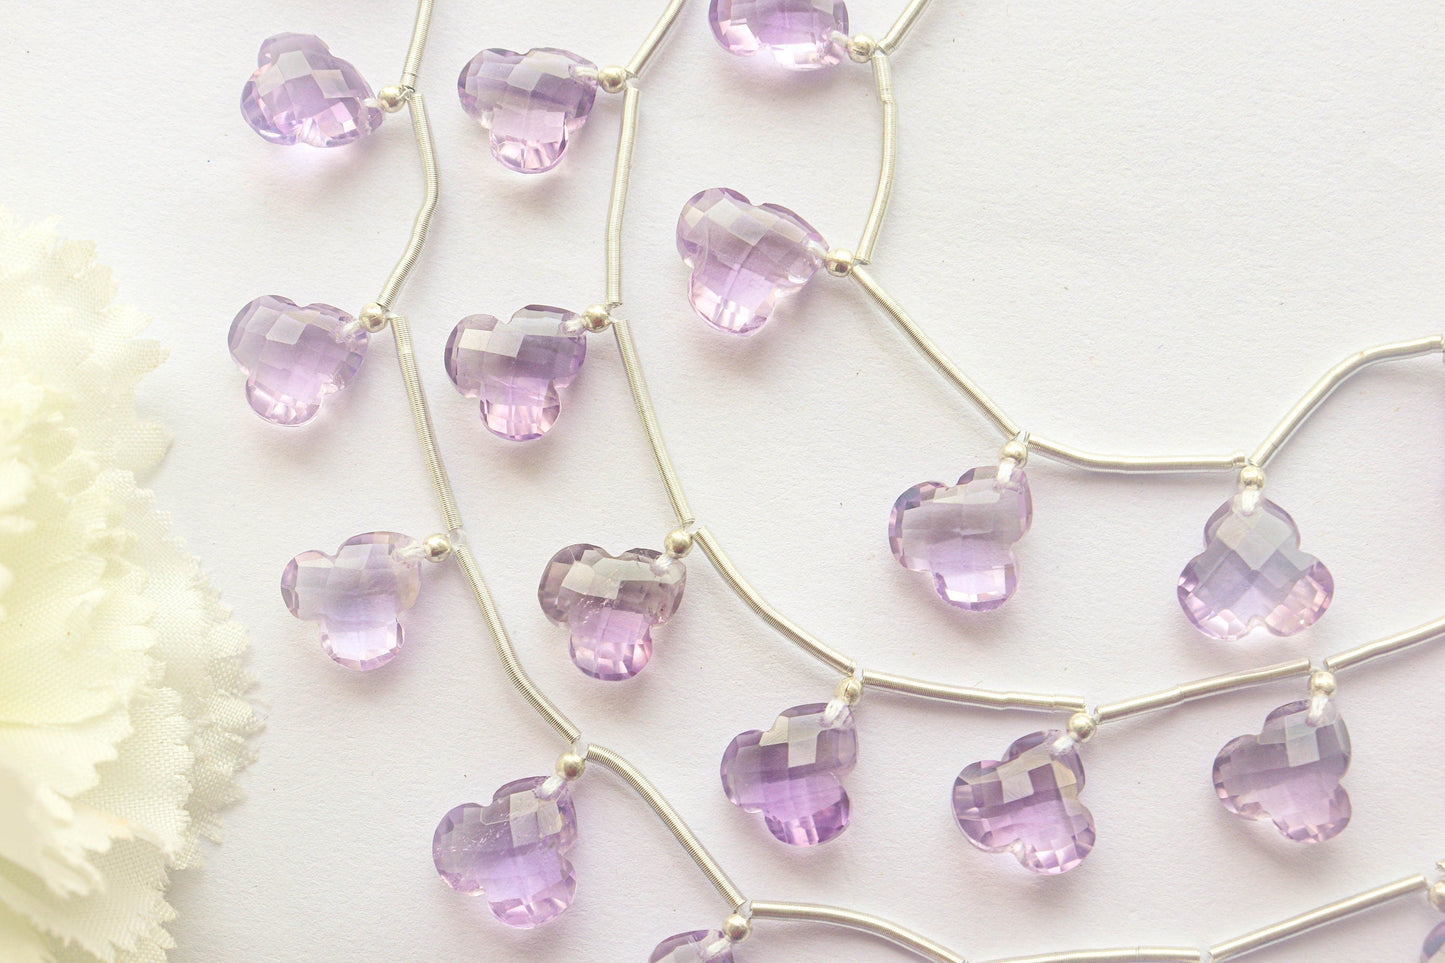 Amethyst Flower shape Faceted Beads | 8 Inch String | Natural Gemstone | 10 Pieces | 11x11mm | Beadsforyourjewelry Beadsforyourjewelry